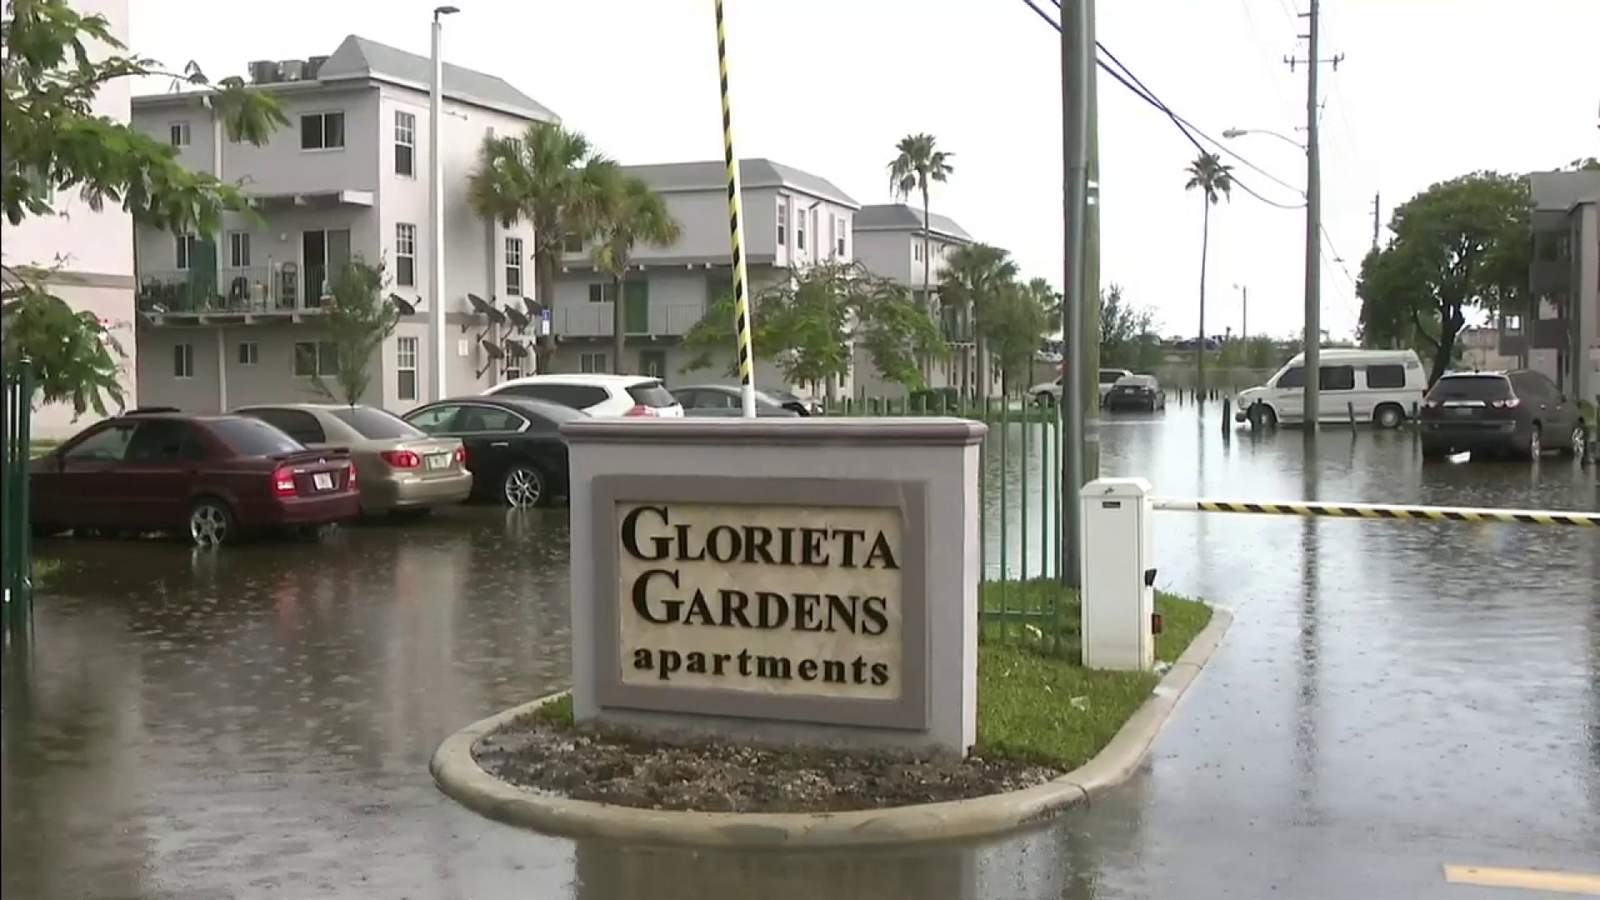 Residents at Opa-locka apartment complex say owners refuse to fix chronic flooding problems